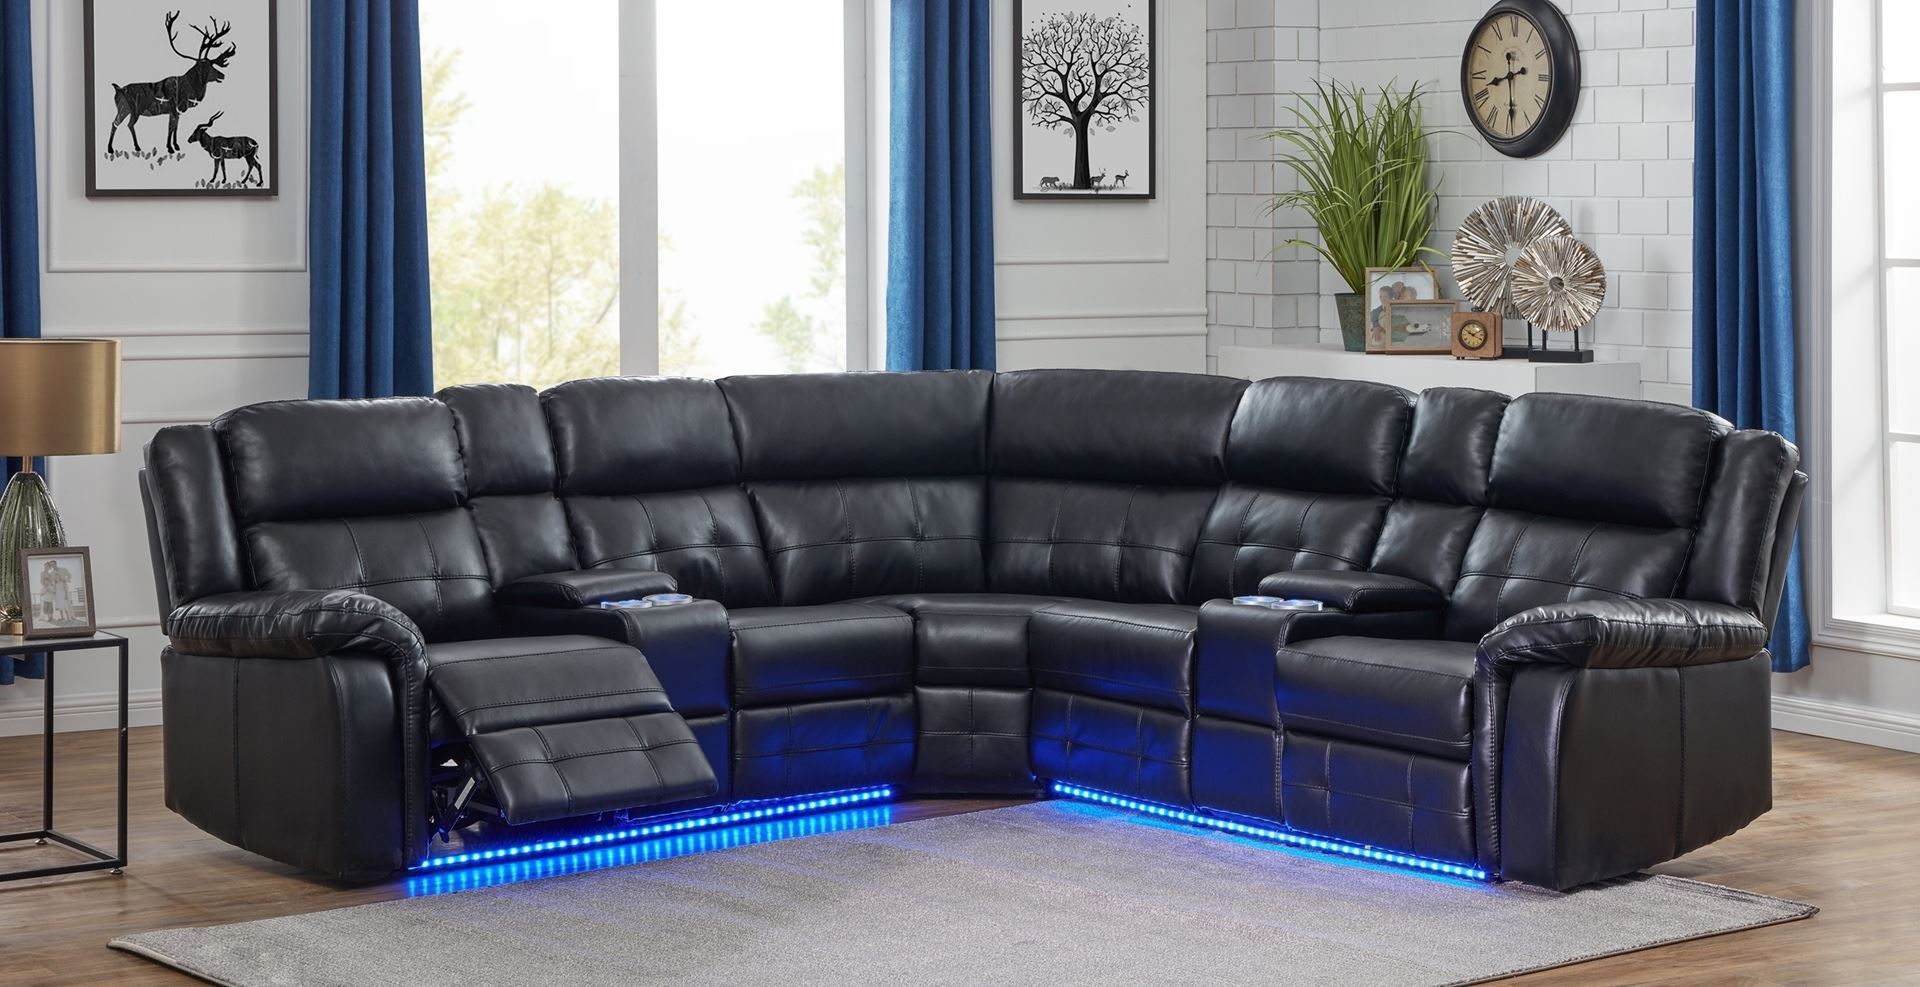 COBALT POWER/MANUAL RECLINING SECTIONAL SOFA WITH LED